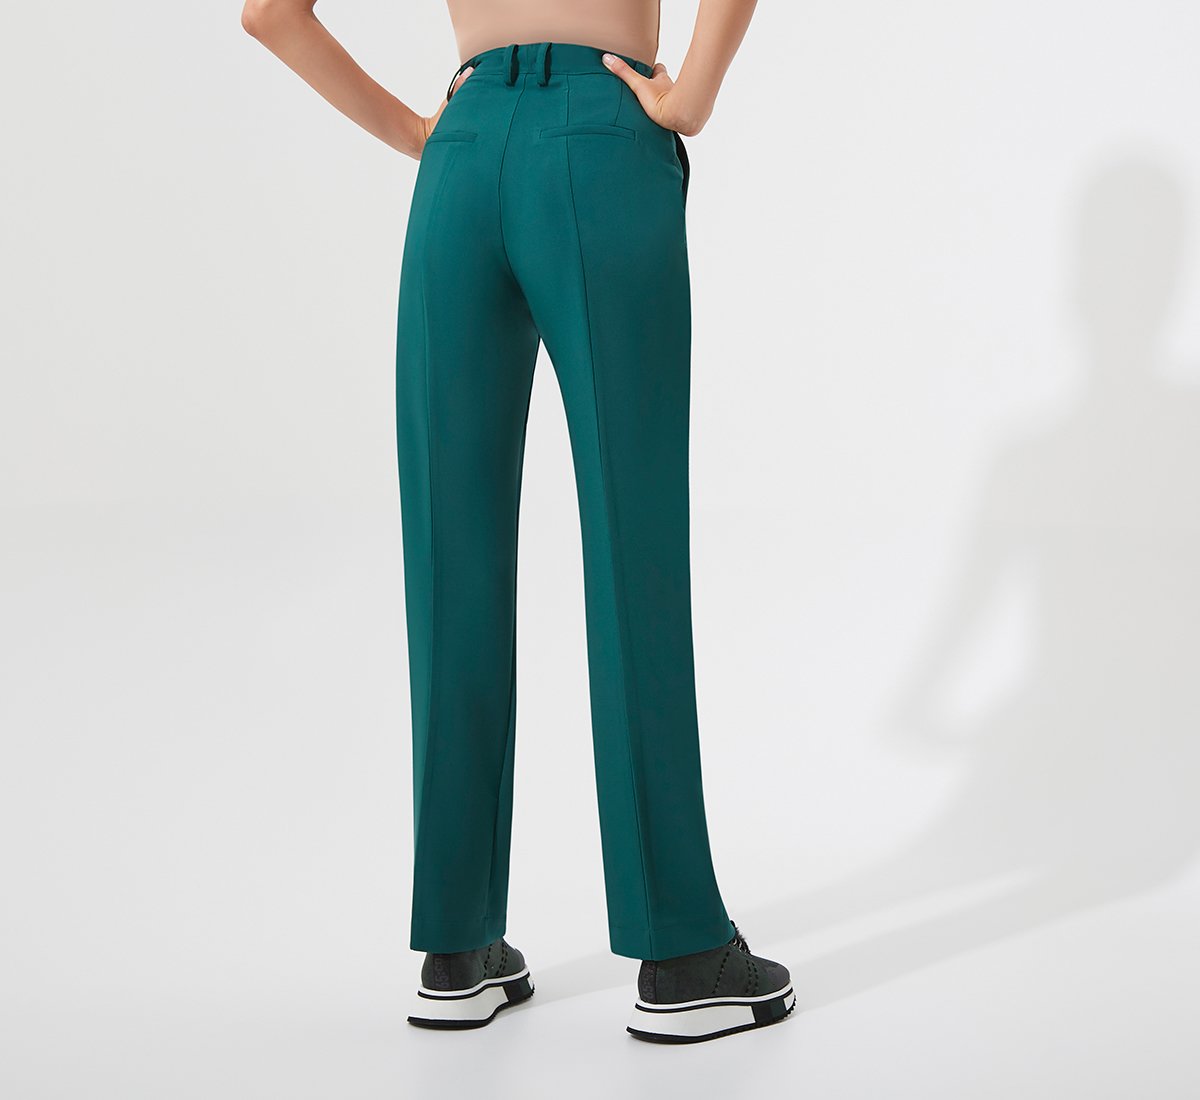 Green high waisted trousers